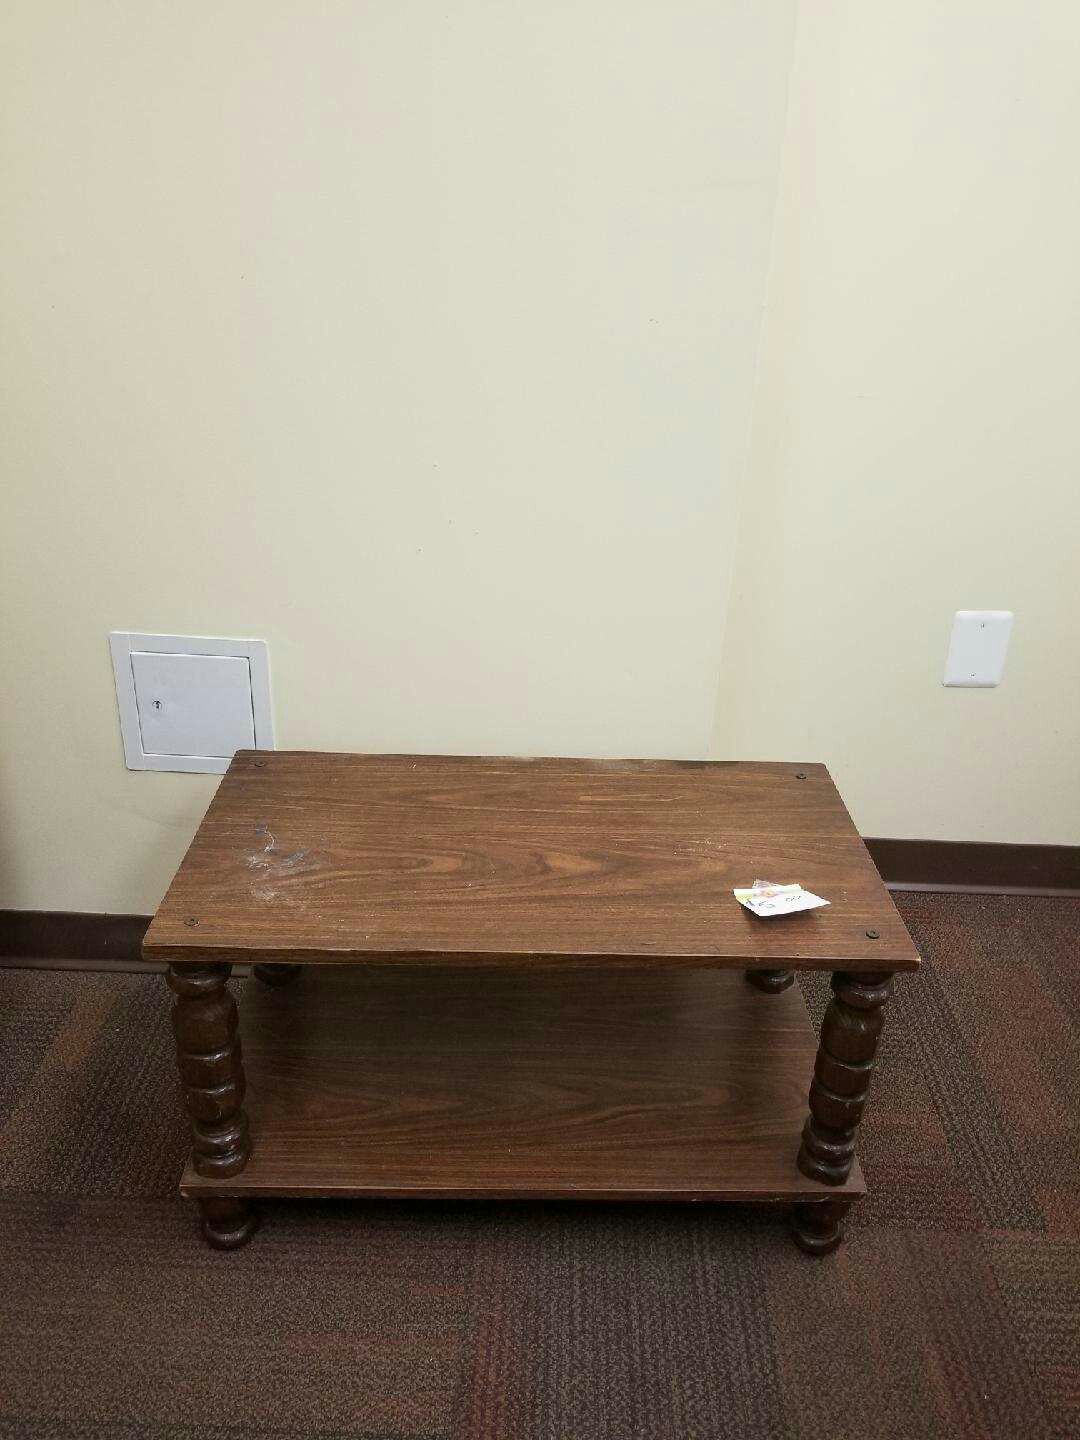 Small coffee table good for small space in decent condition